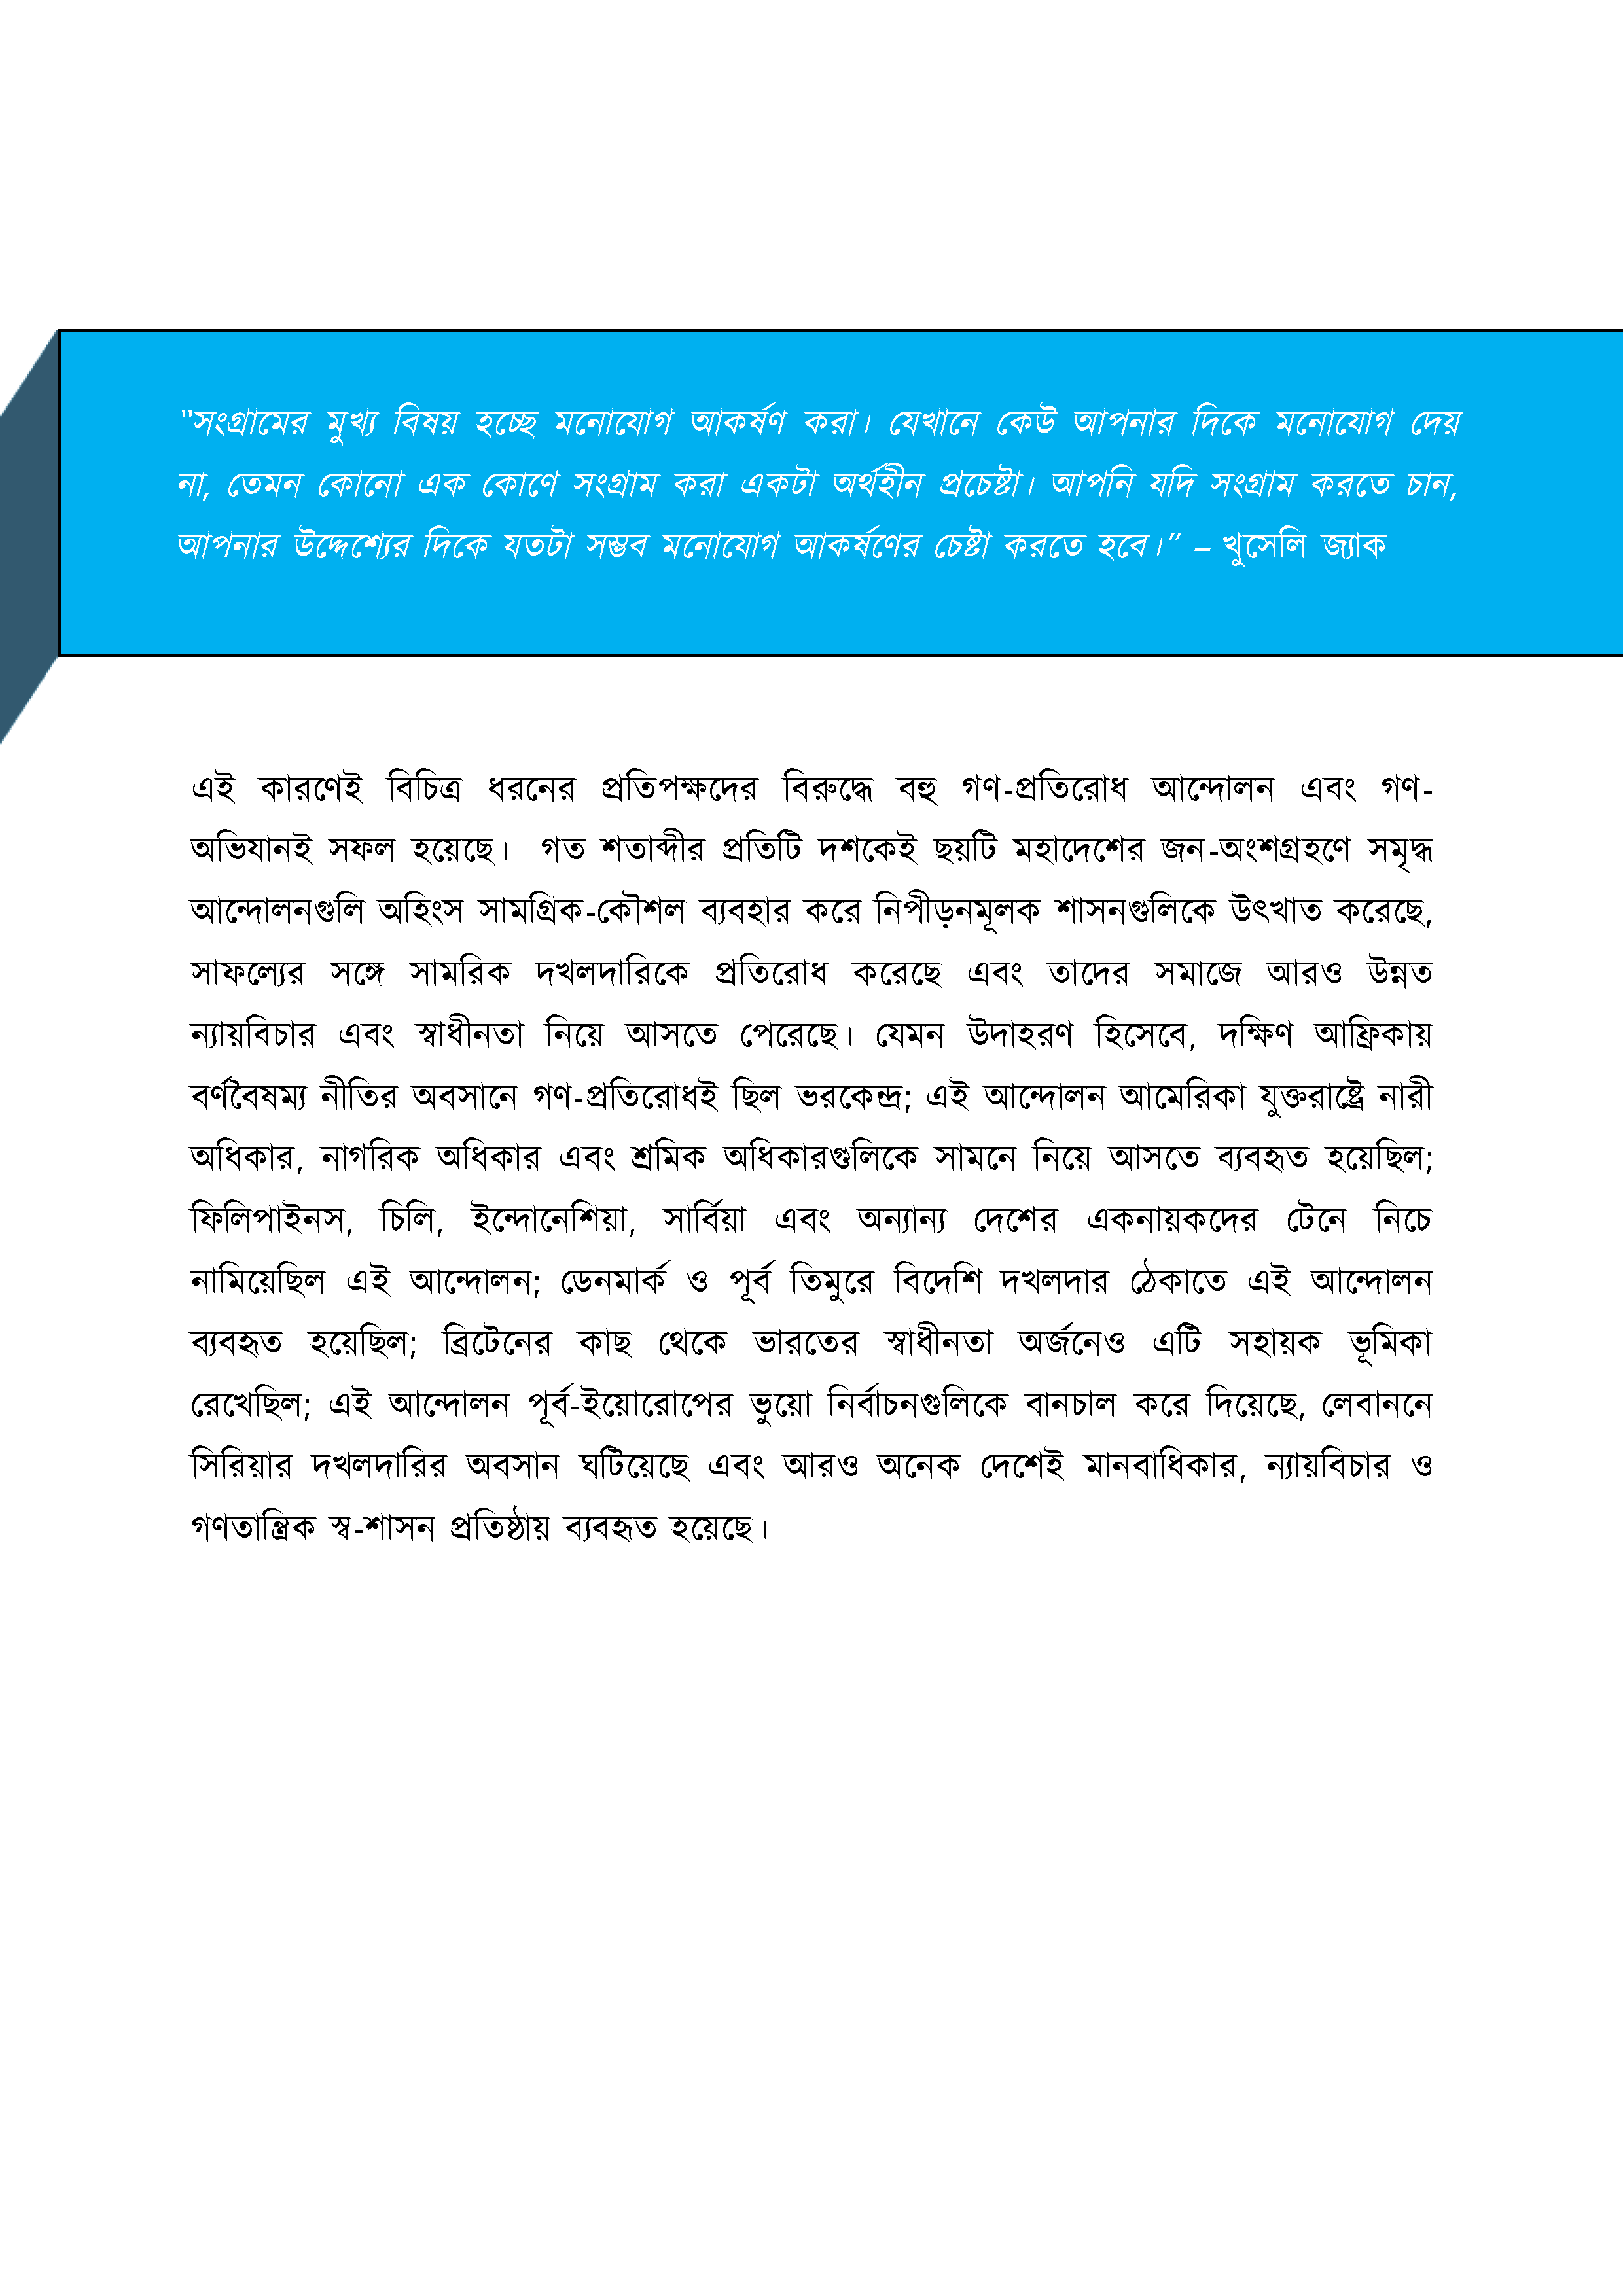 Civil Resistance: A First Look (booklet) (Bangla)